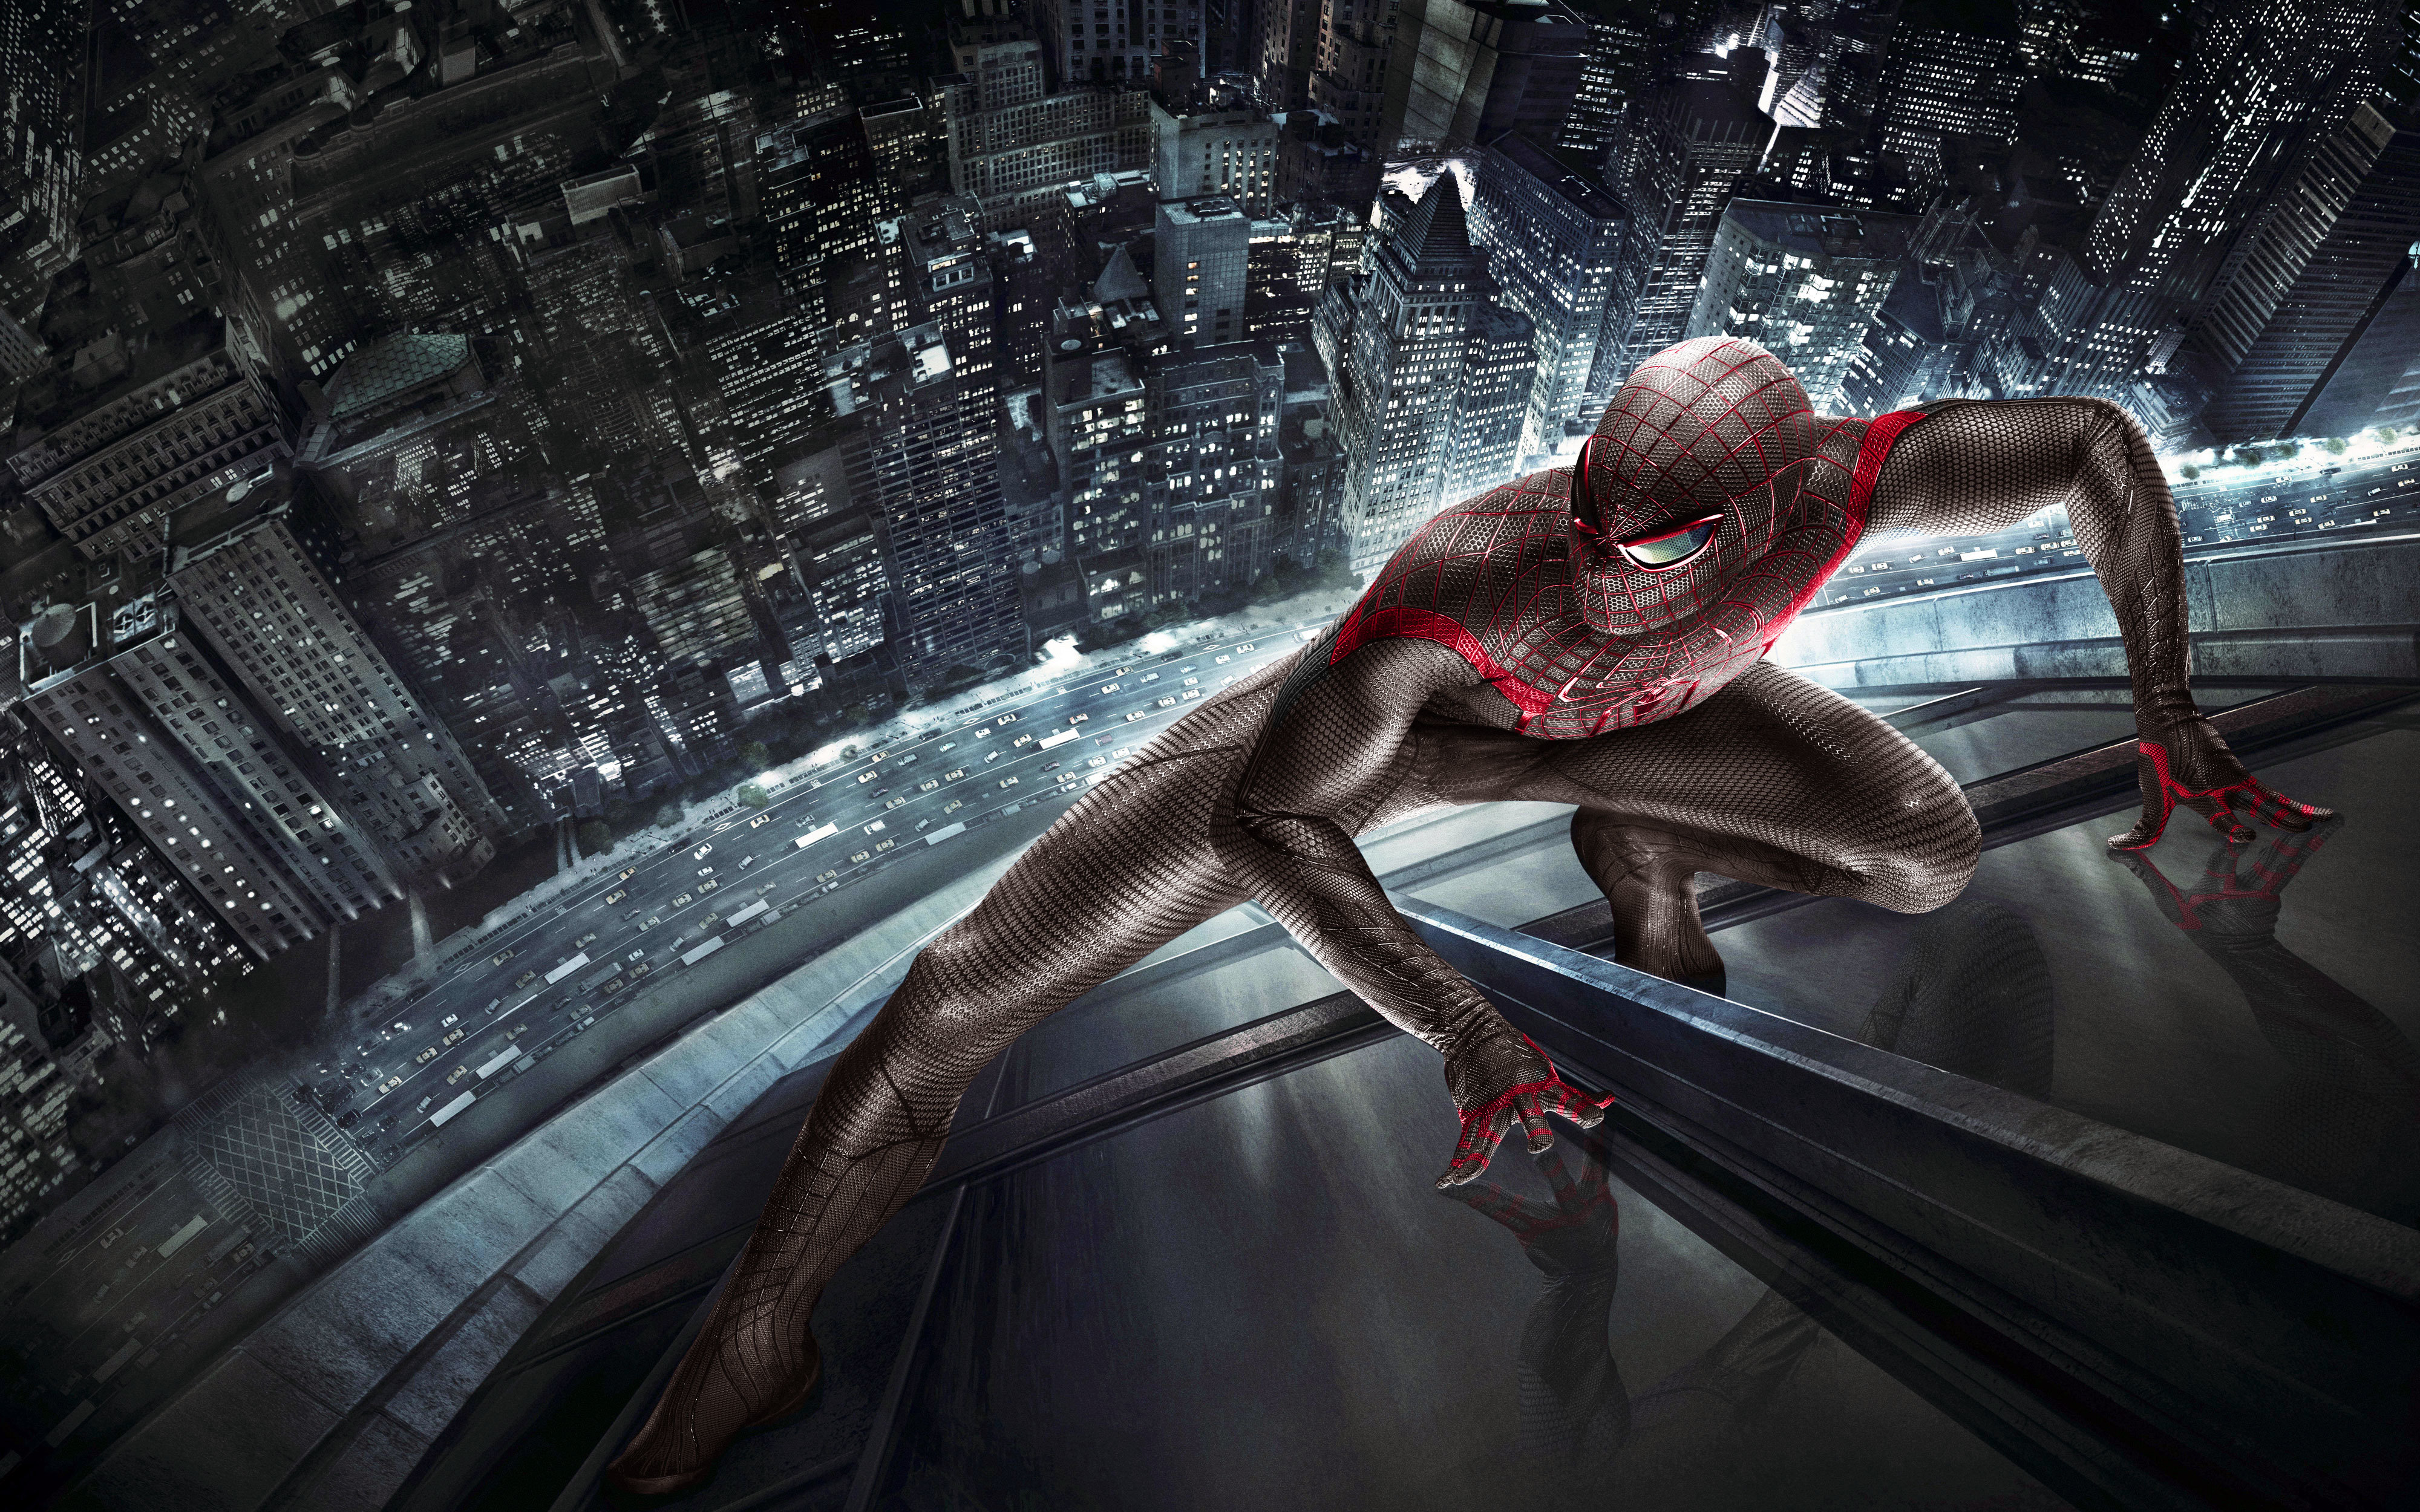 the amazing spider man images free download